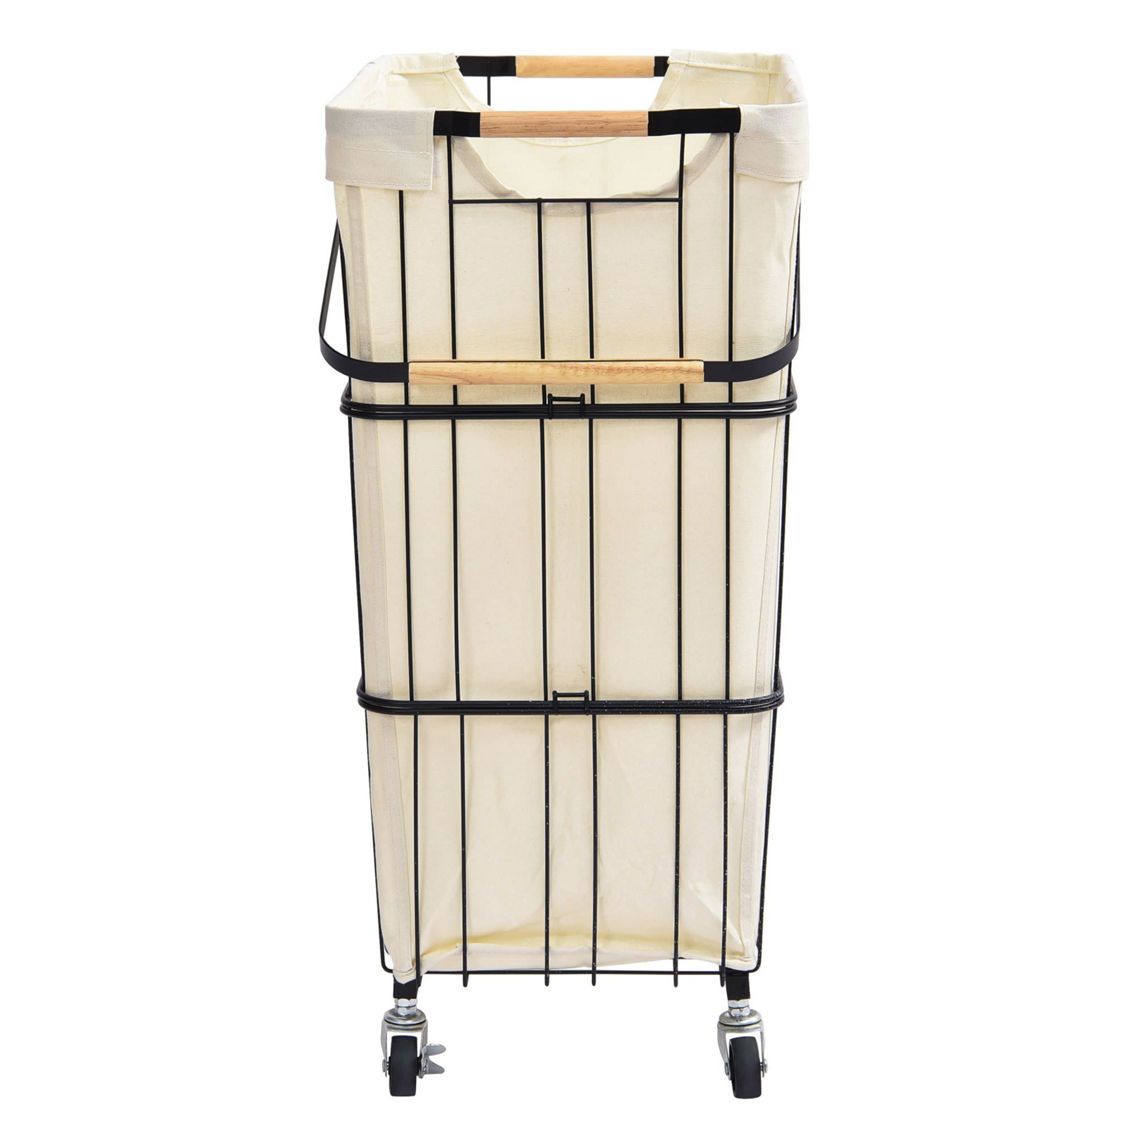 Oceanstar Mobile Rolling Storage Laundry Basket Cart with Handle, Black - Image 3 of 5